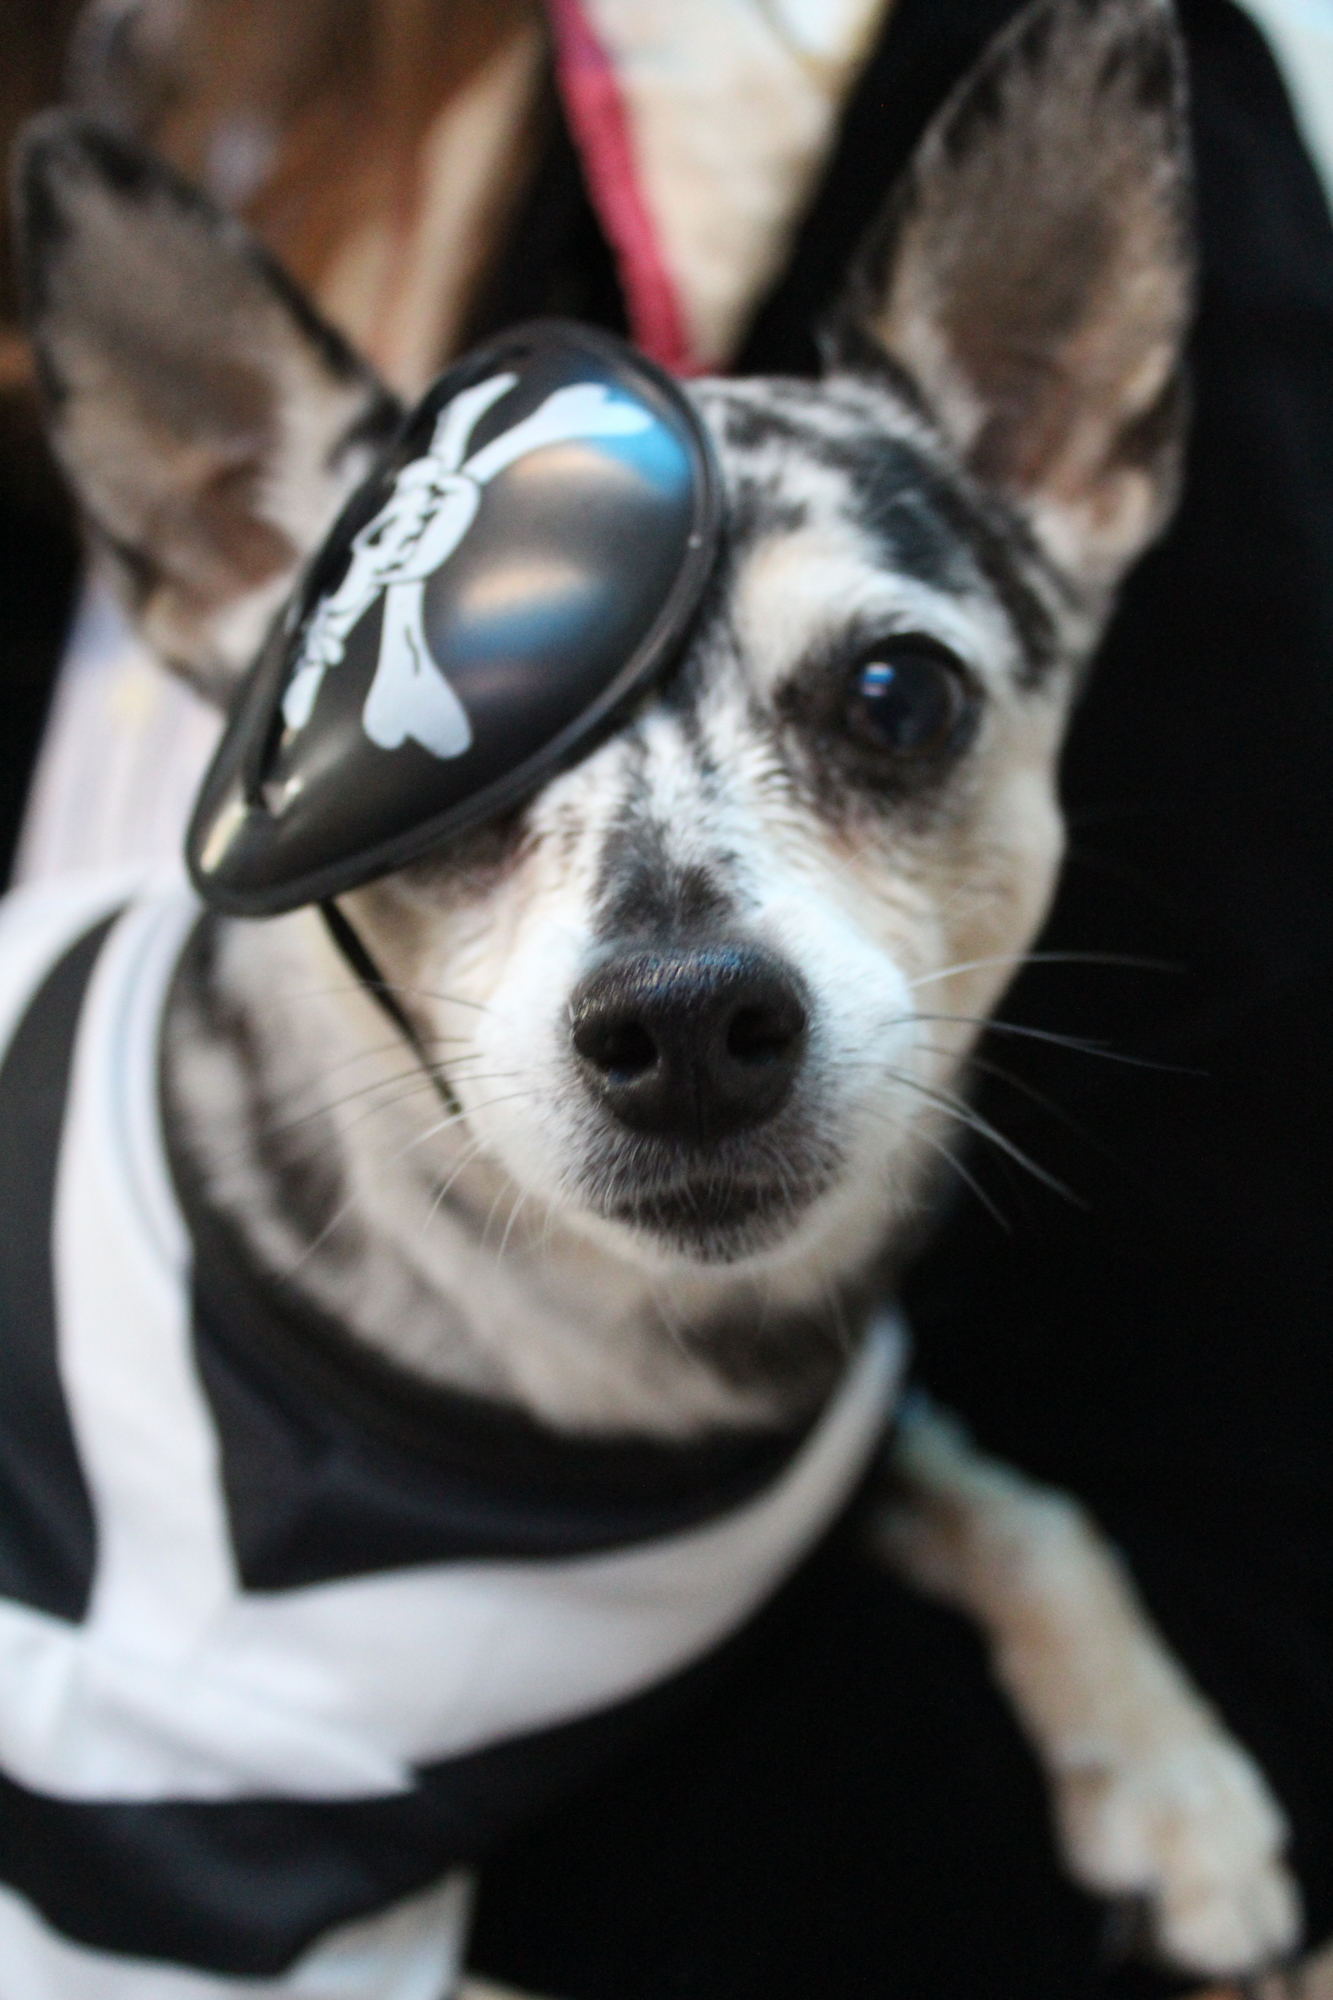 Magic the dog shows off his pirate side with an eye patch. Photo by Jarleene Almenas